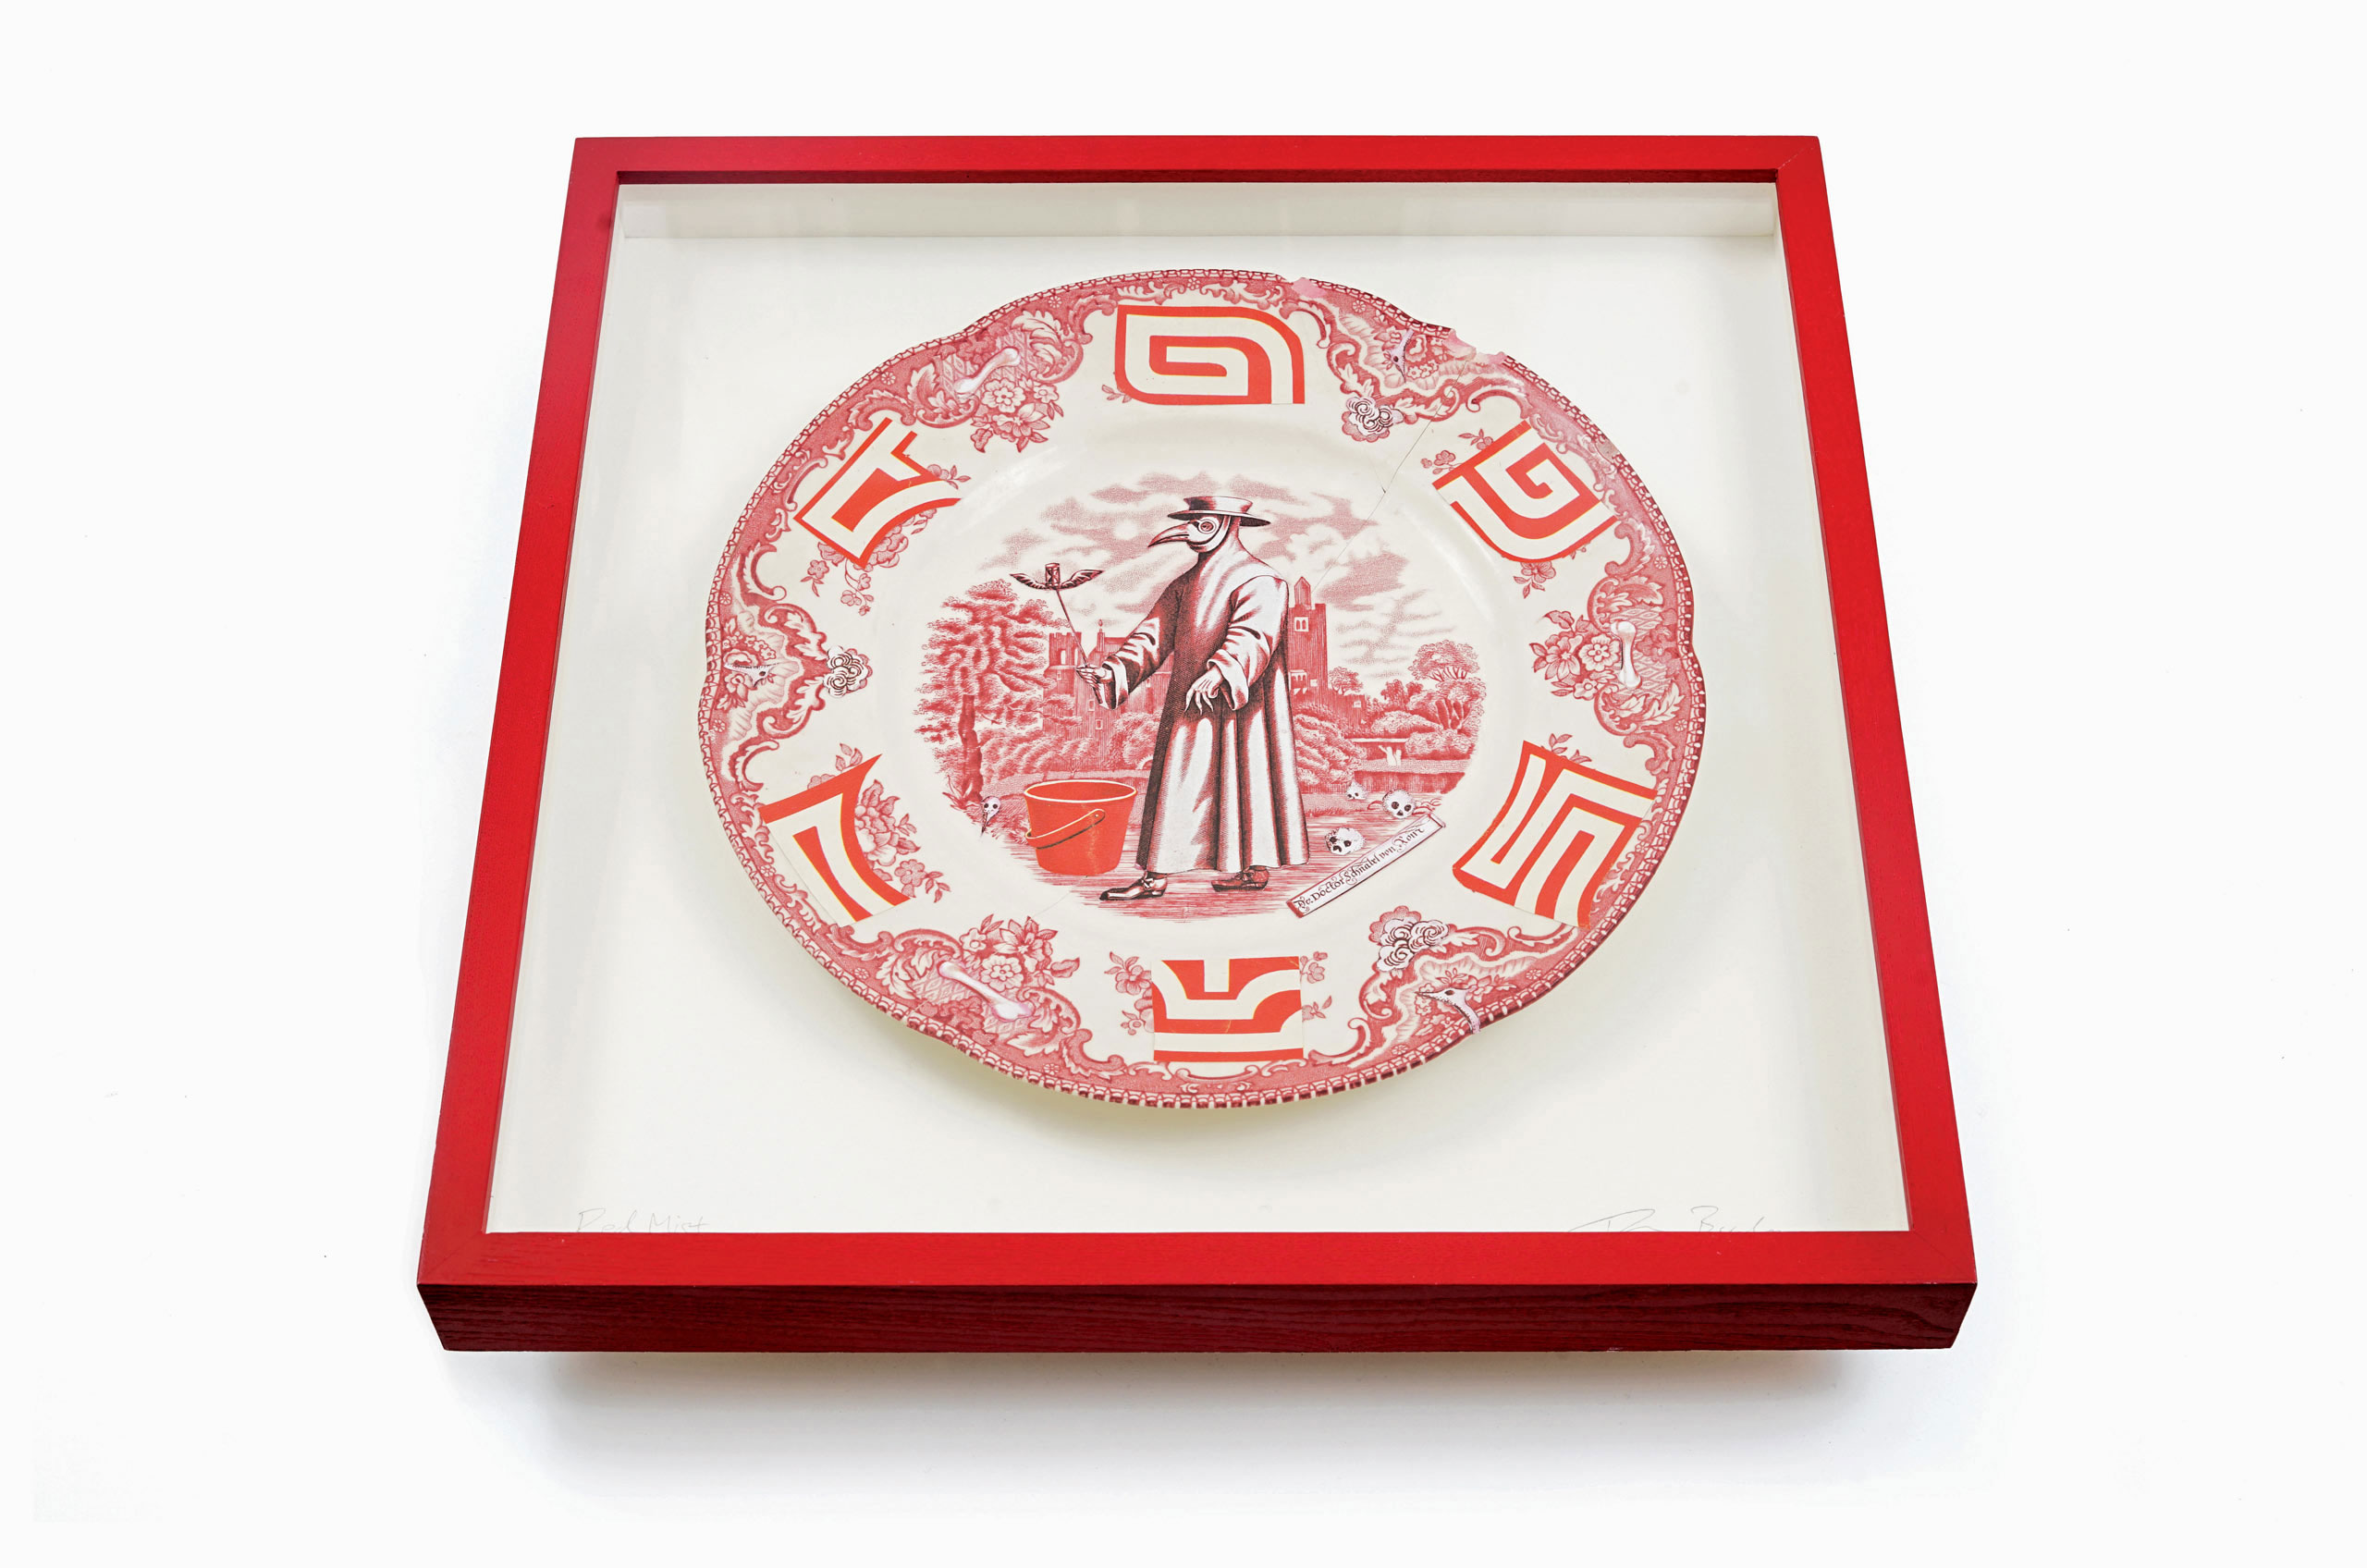 RED MIST by Tom Buchanan 2020, 35 × 35 × 5 cm Illustrated ceramic plate in wooden tinted box frame. Courtesy of Tom Buchanan and 8 Books.